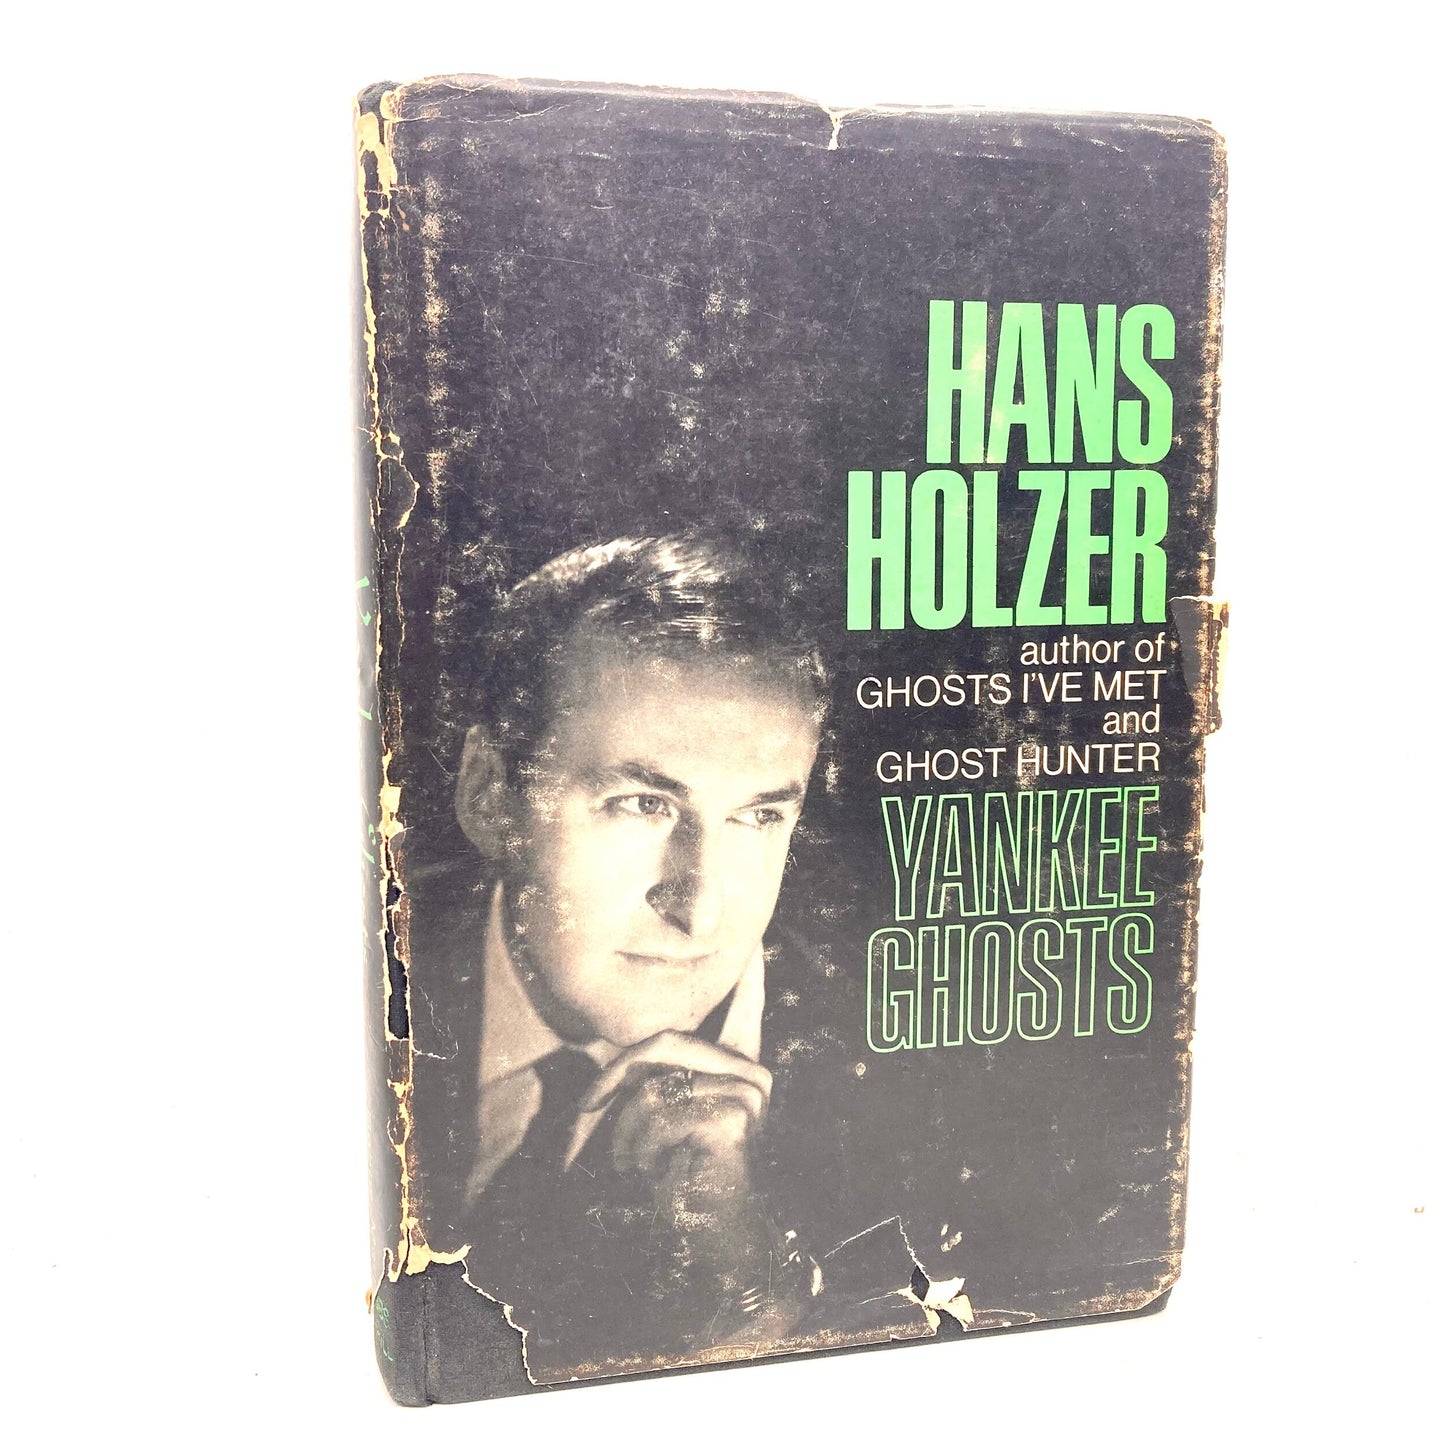 HOLZER, Hans "Yankee Ghosts" [Bobbs-Merrill, 1966] 1st Edition/1st Printing - Buzz Bookstore